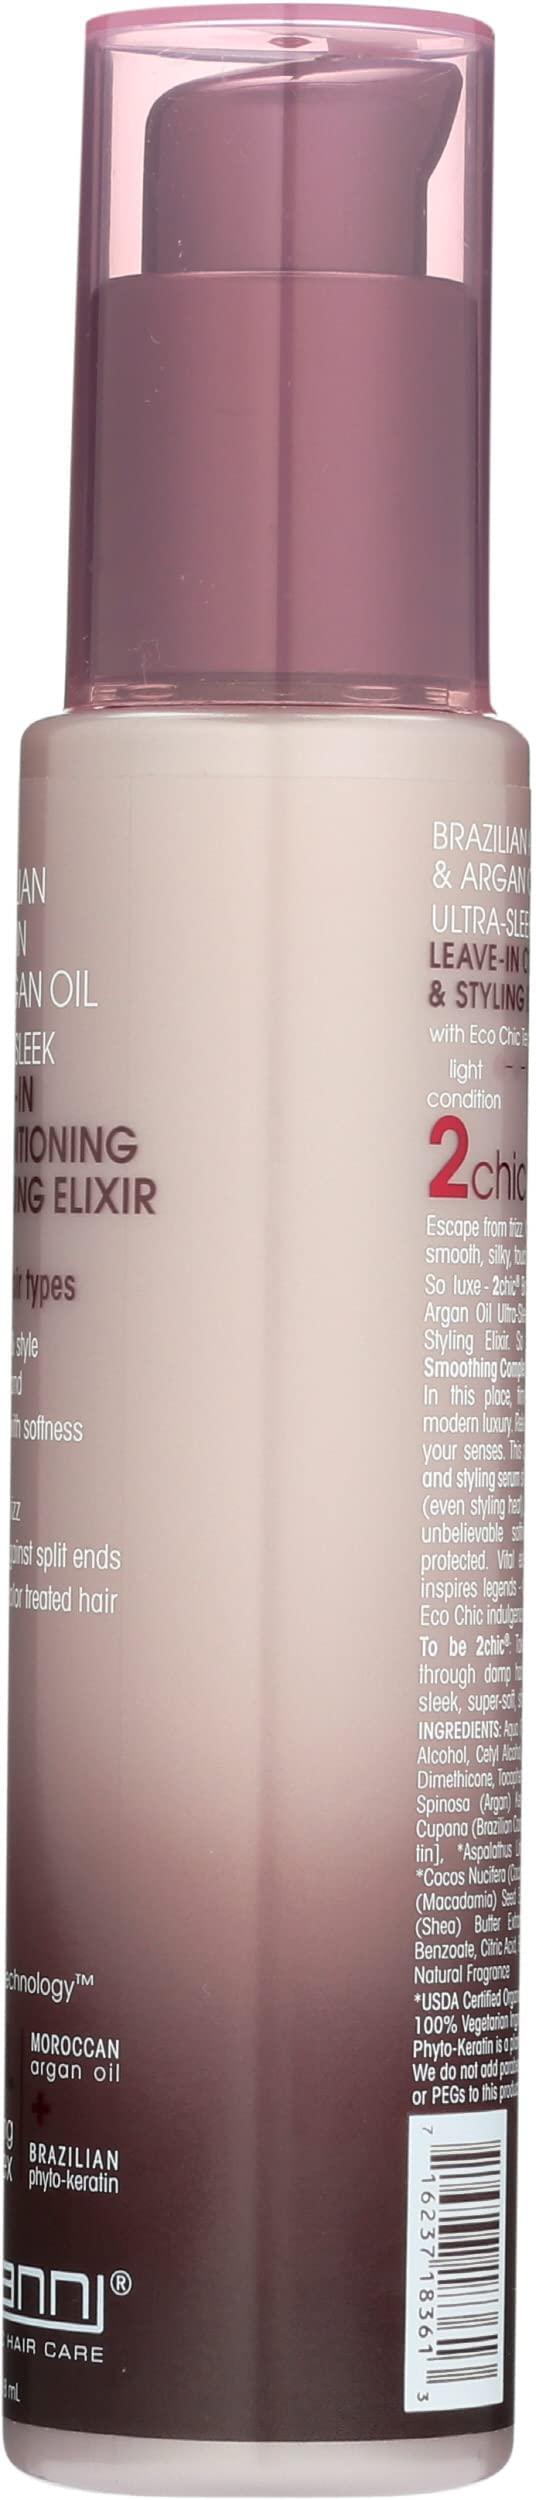 GIOVANNI 2chic Ultra-Sleek Leave-In Conditioning & Styling Elixir, 4 oz. - Phyto-Keratin & Argan Oil, Anti-Frizz Formula, Coconut, Shea Butter, Pro-Vitamin B5, Color Safe, Paraben Free